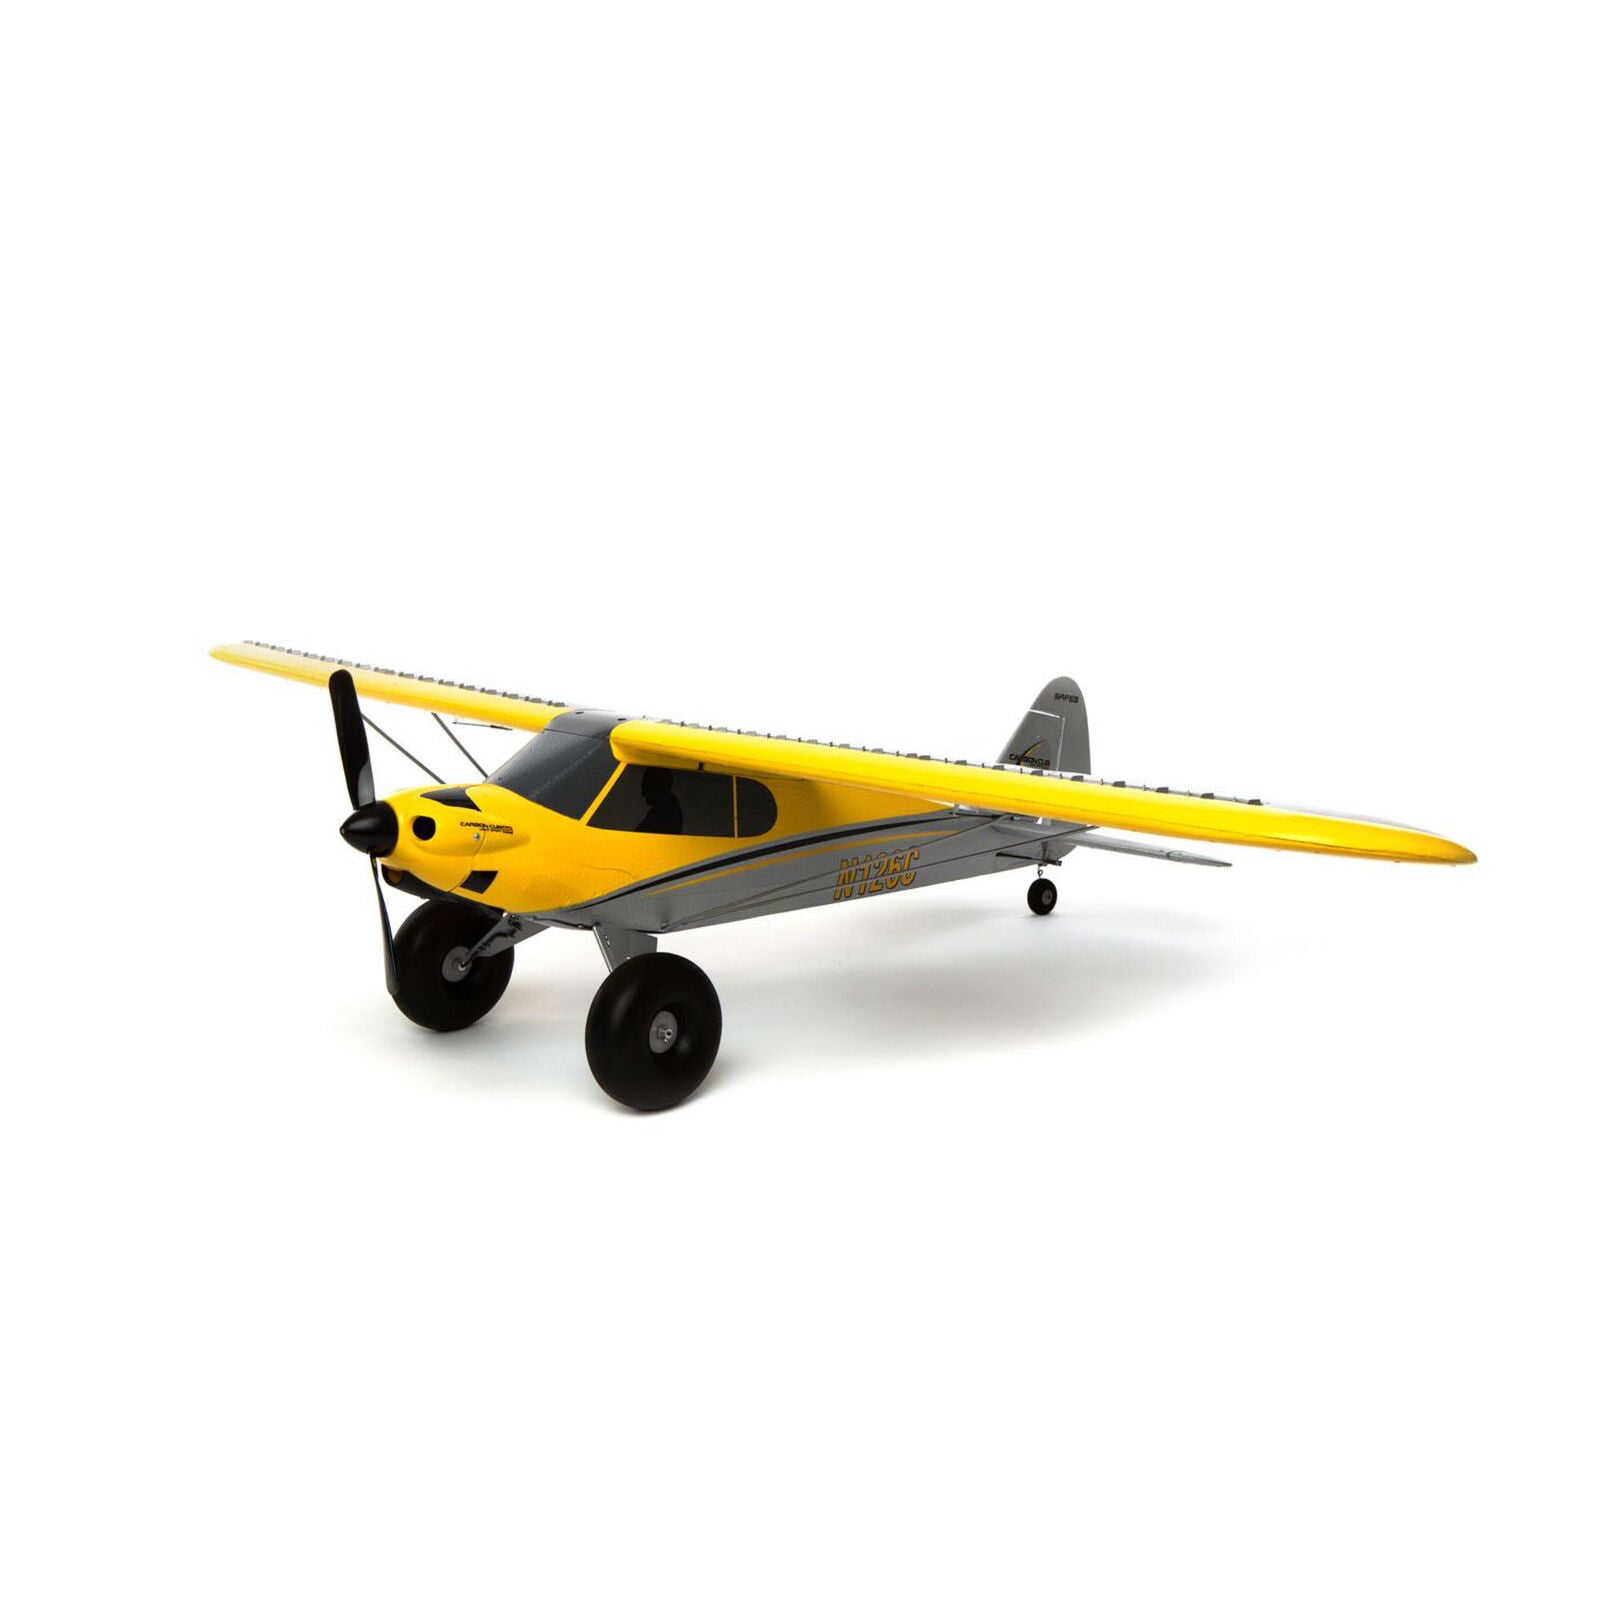 HOBBYZONE HBZ32500 Carbon Cub S 2 1.3m BNF Basic with SAFE